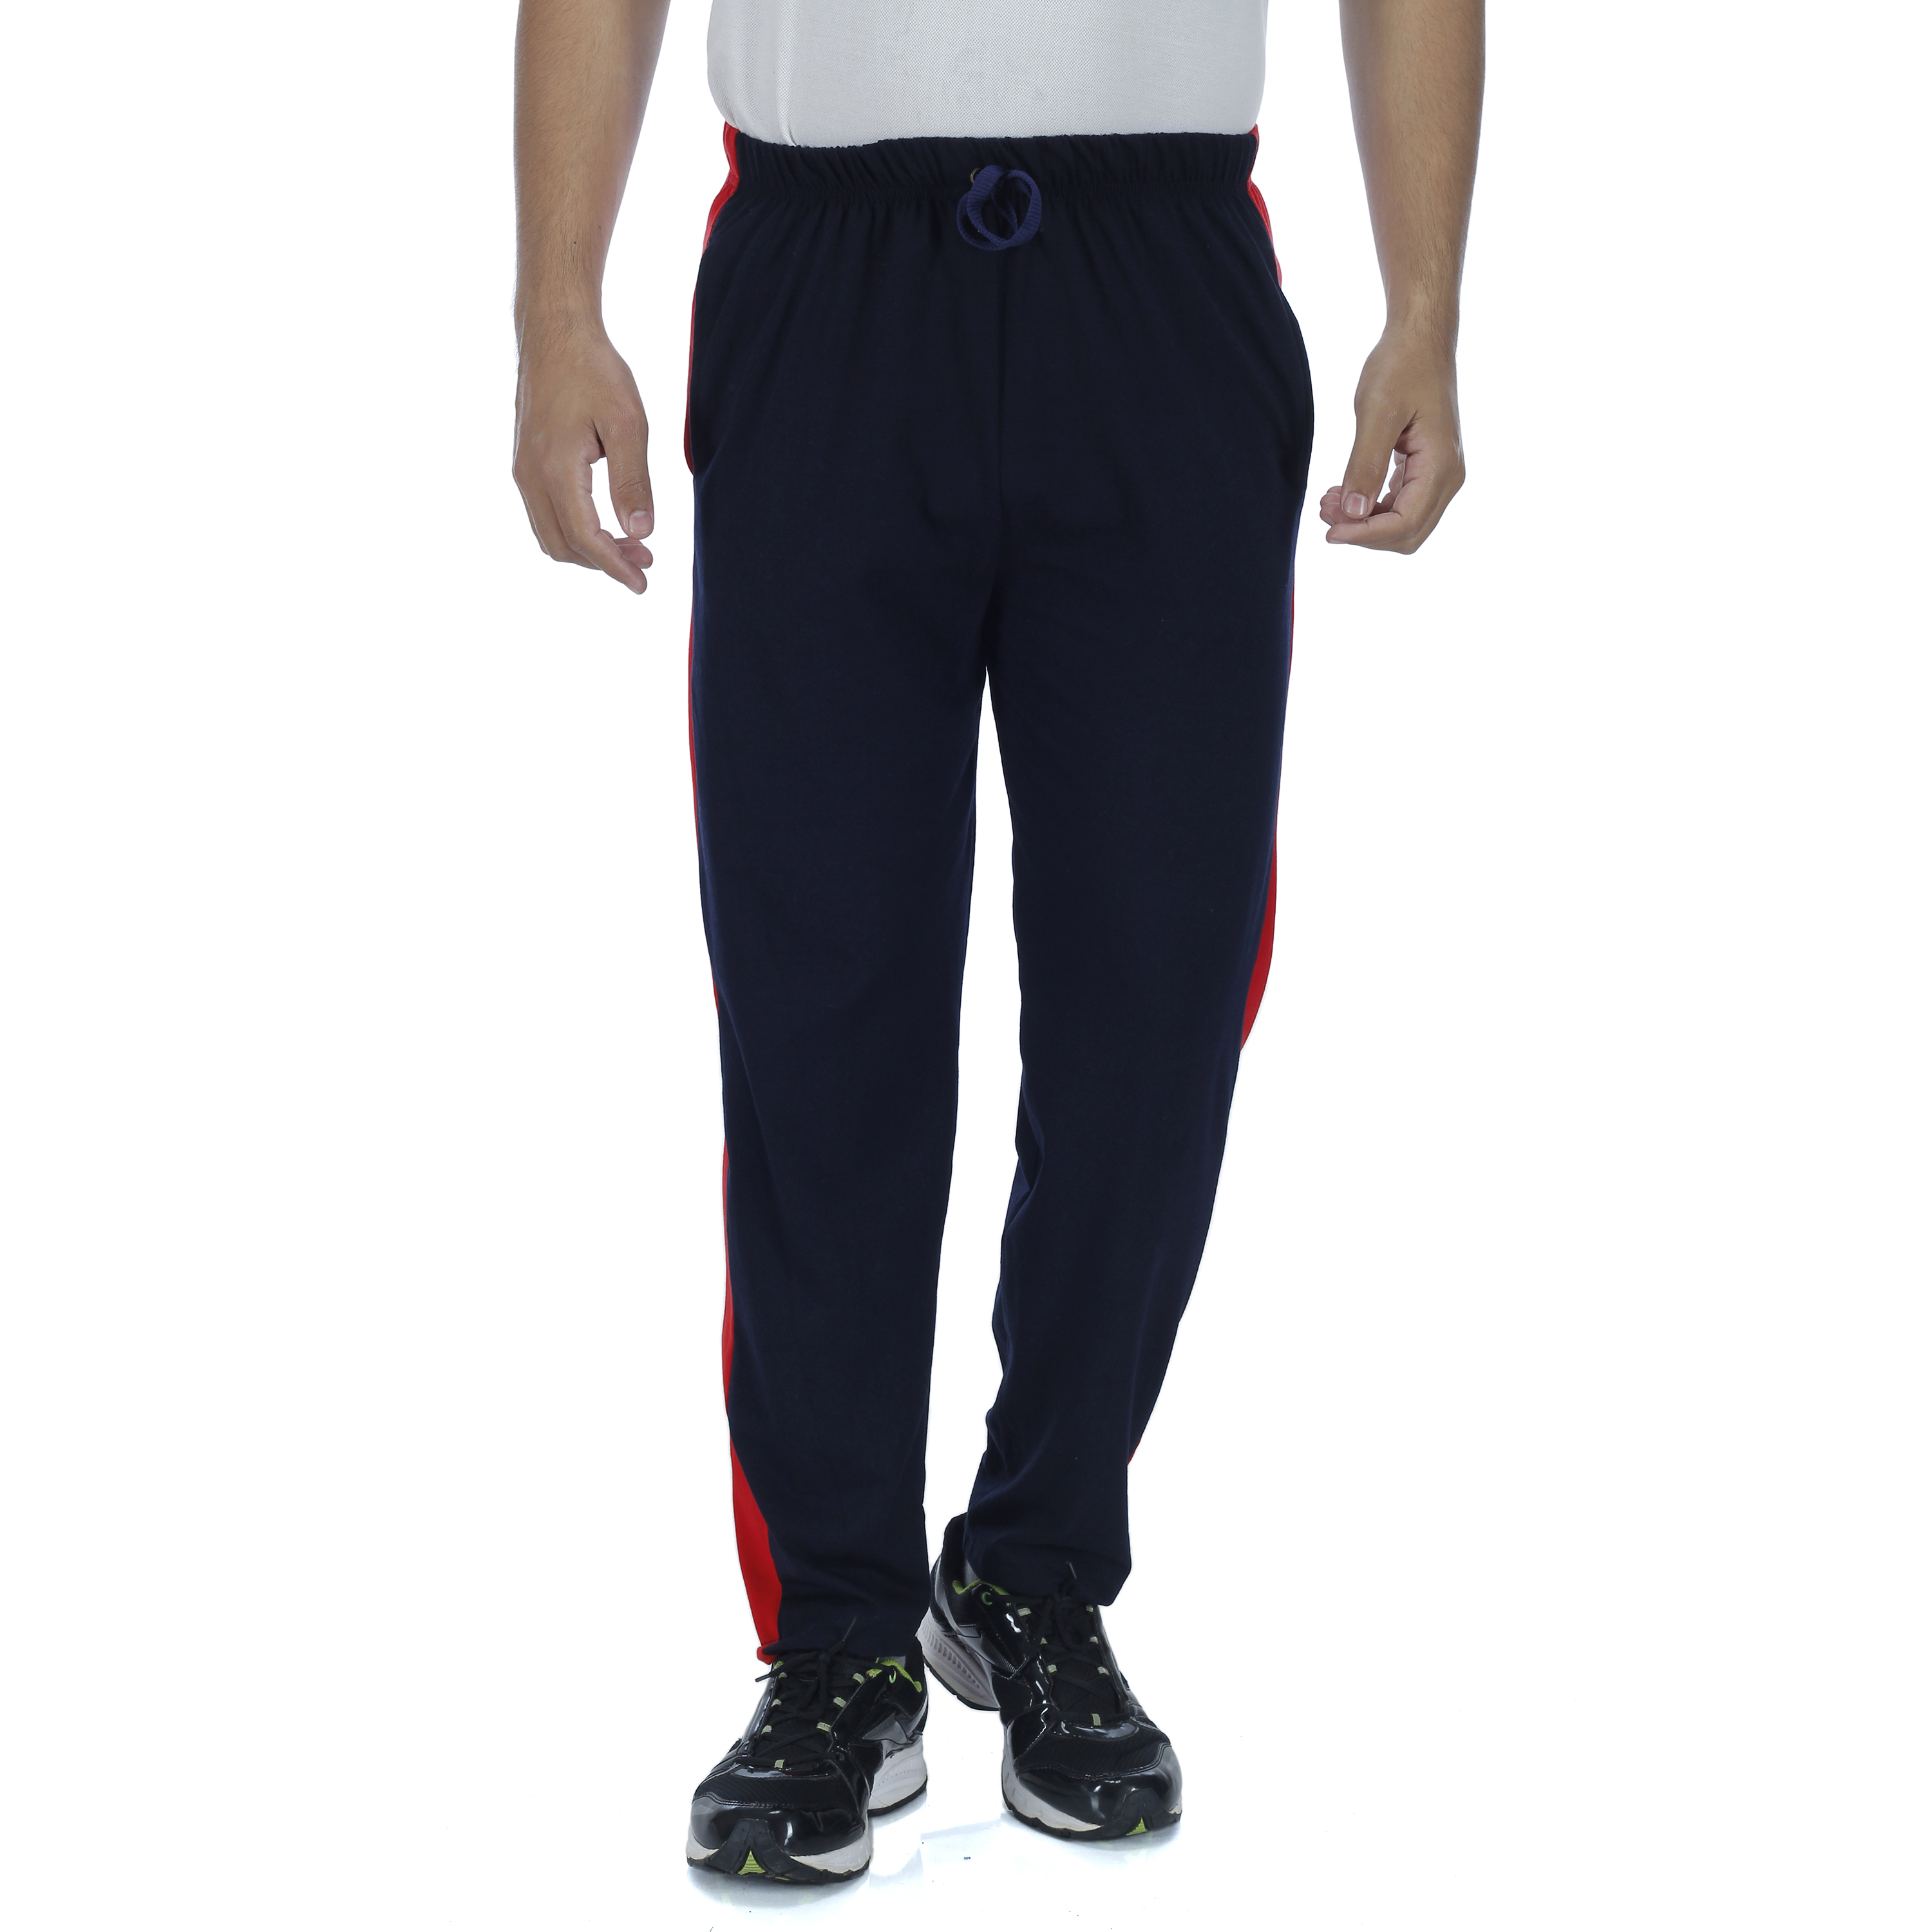 Buy Trackpant-Sanvi Traders Online @ ₹449 from ShopClues